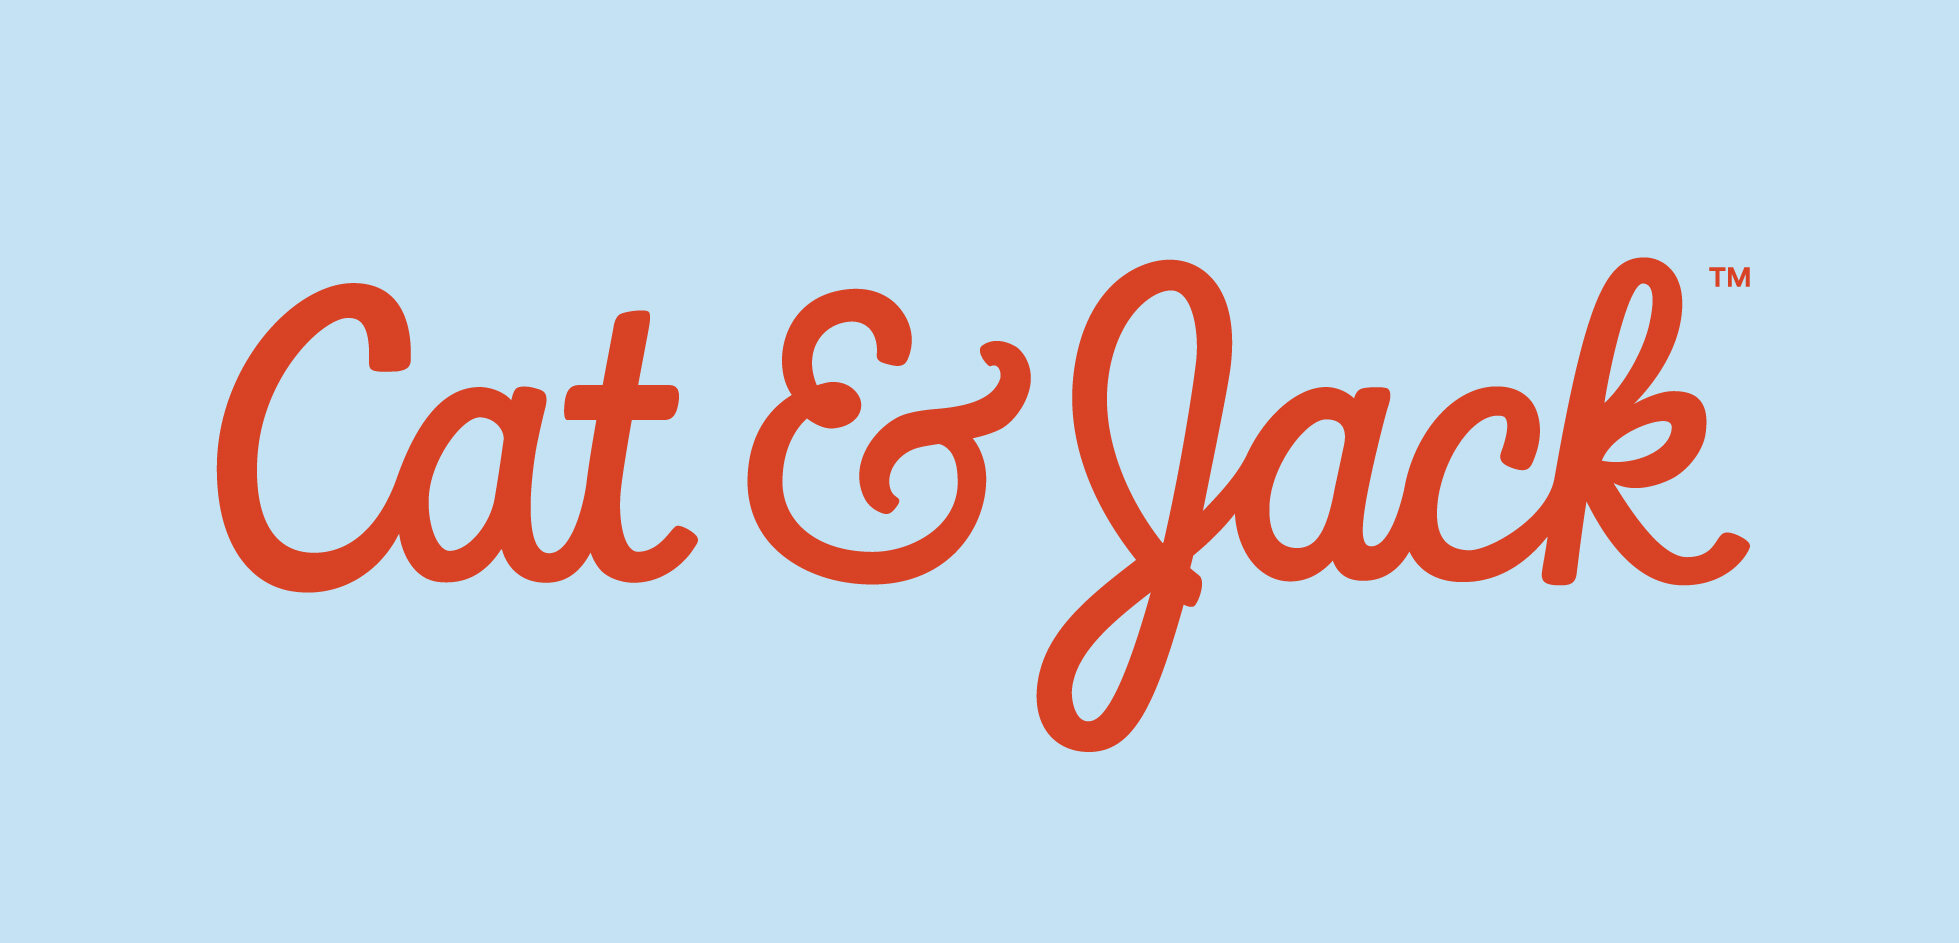 Cat and Jack at Target — Brand Vision Group